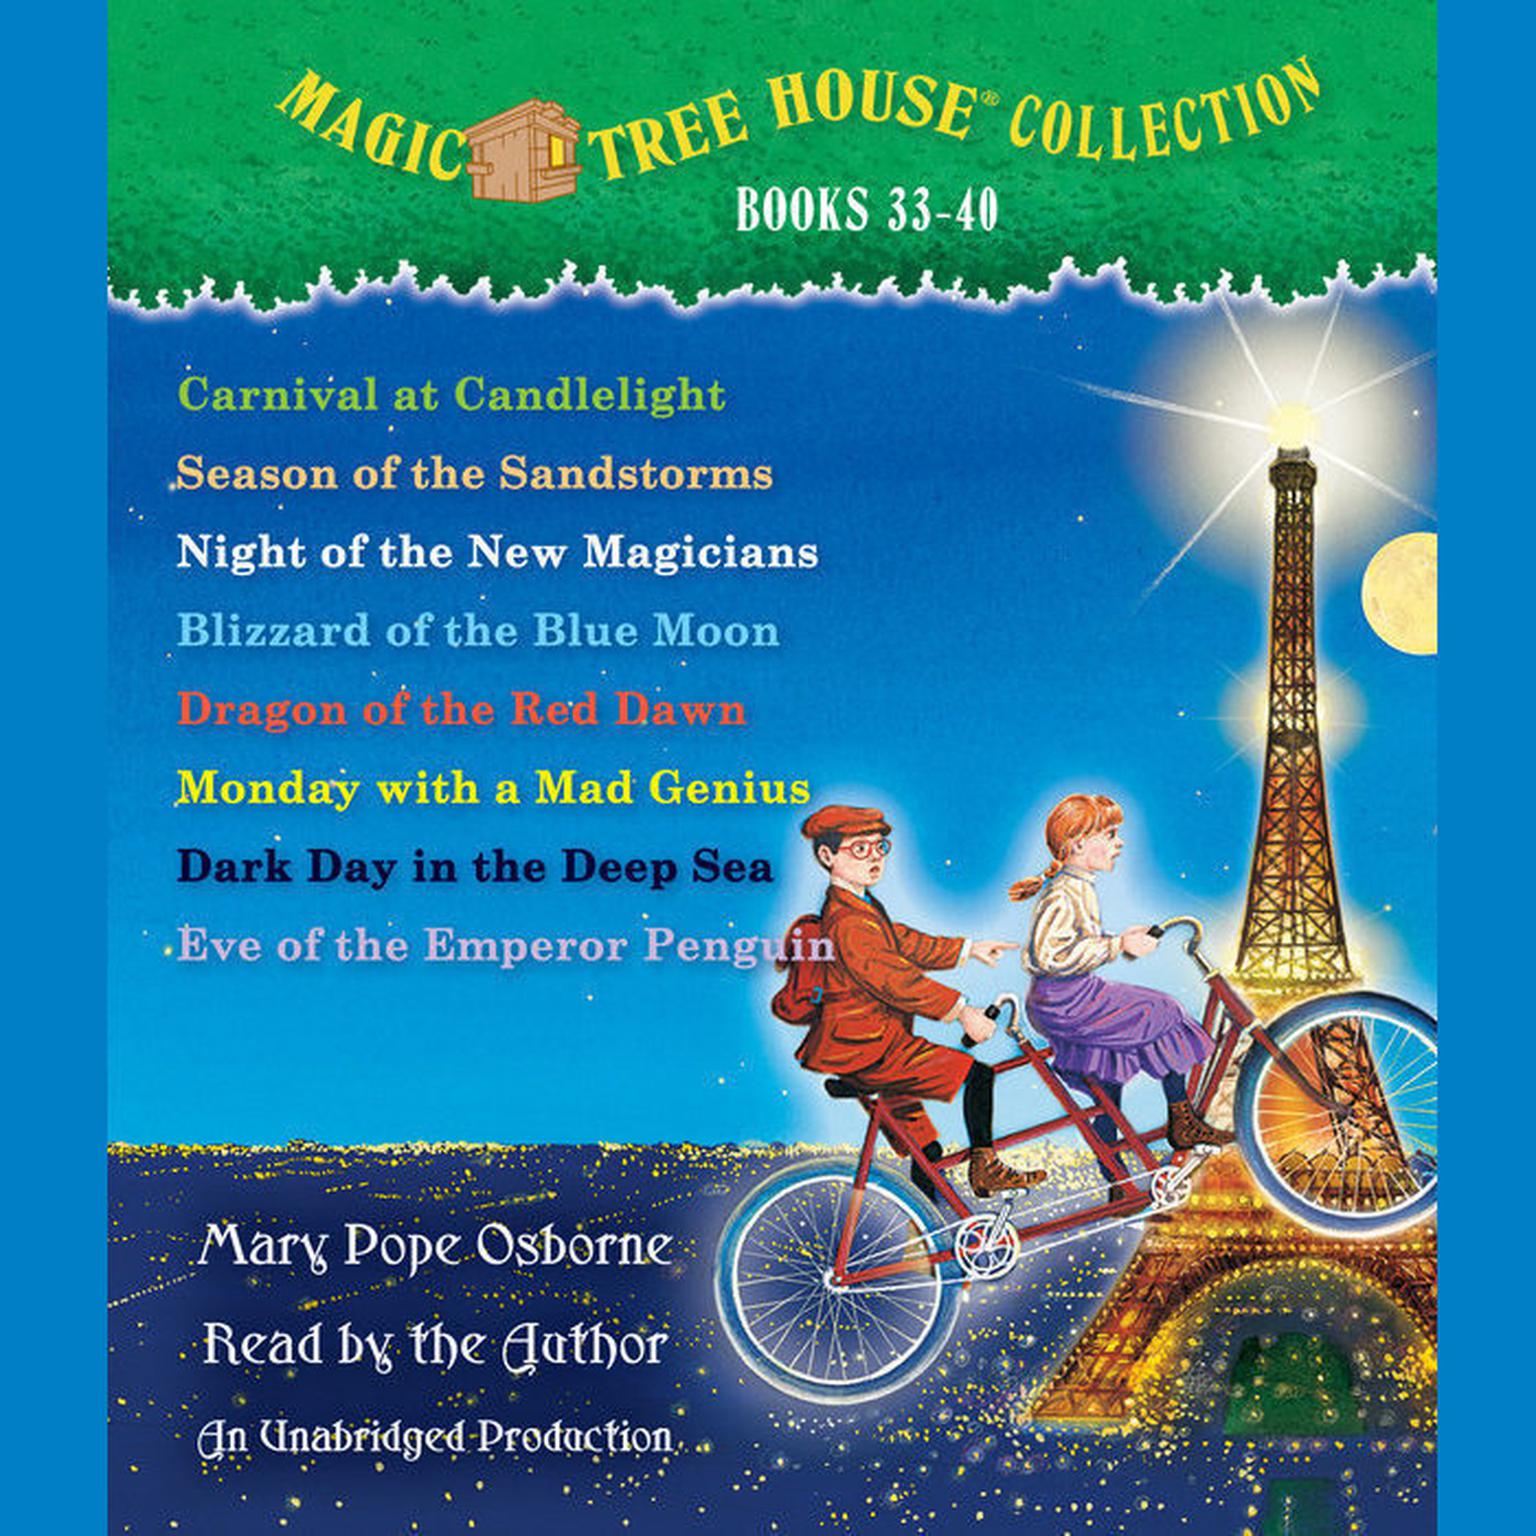 Magic Tree House Collection: Books 33-40 Audiobook, by Mary Pope Osborne